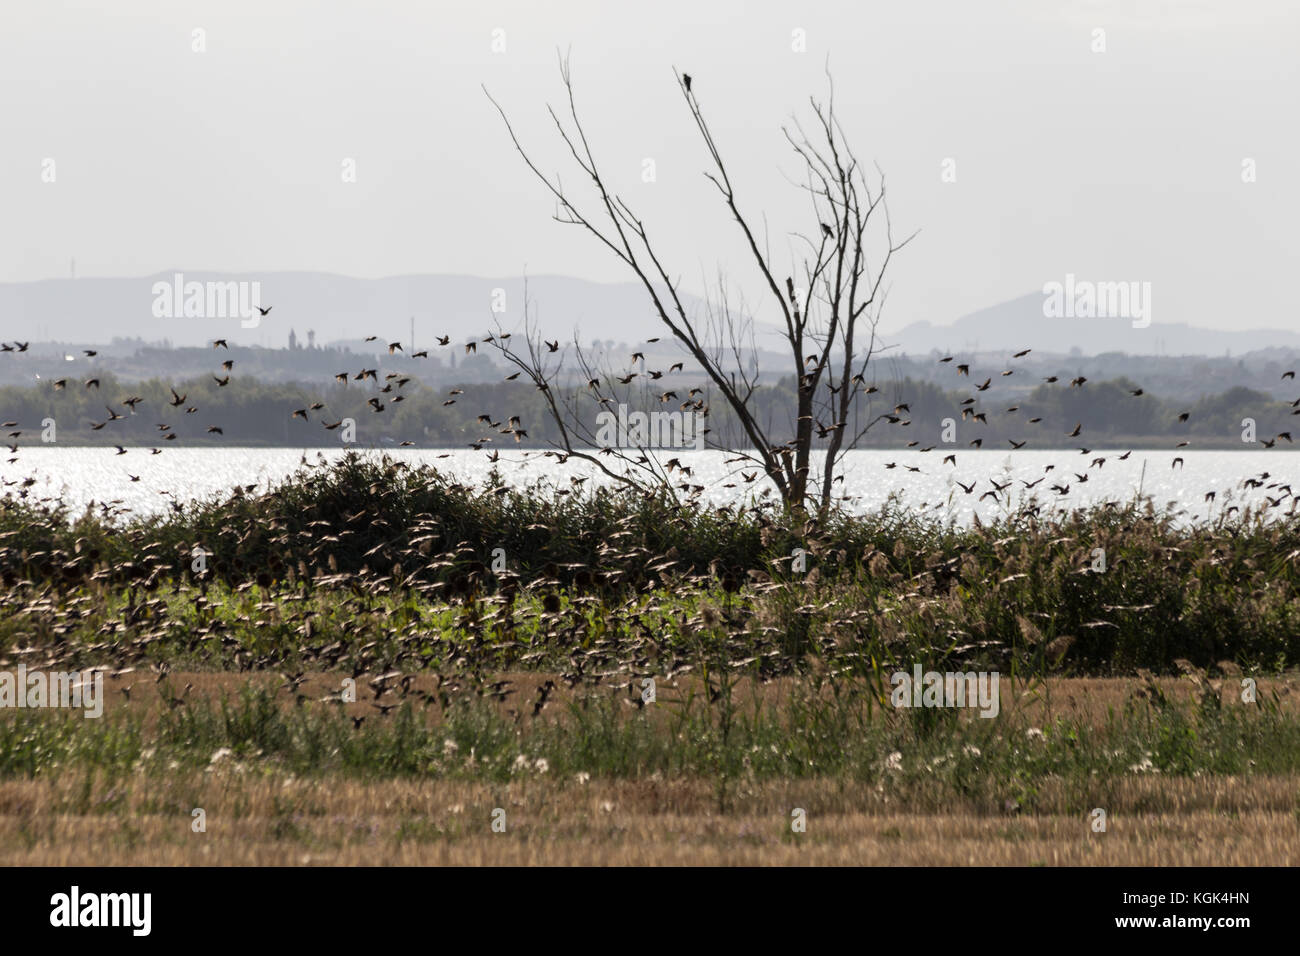 A flock of birds flying over a lake shore, with a tree and vegetation in the foreground and distant hills in the background Stock Photo